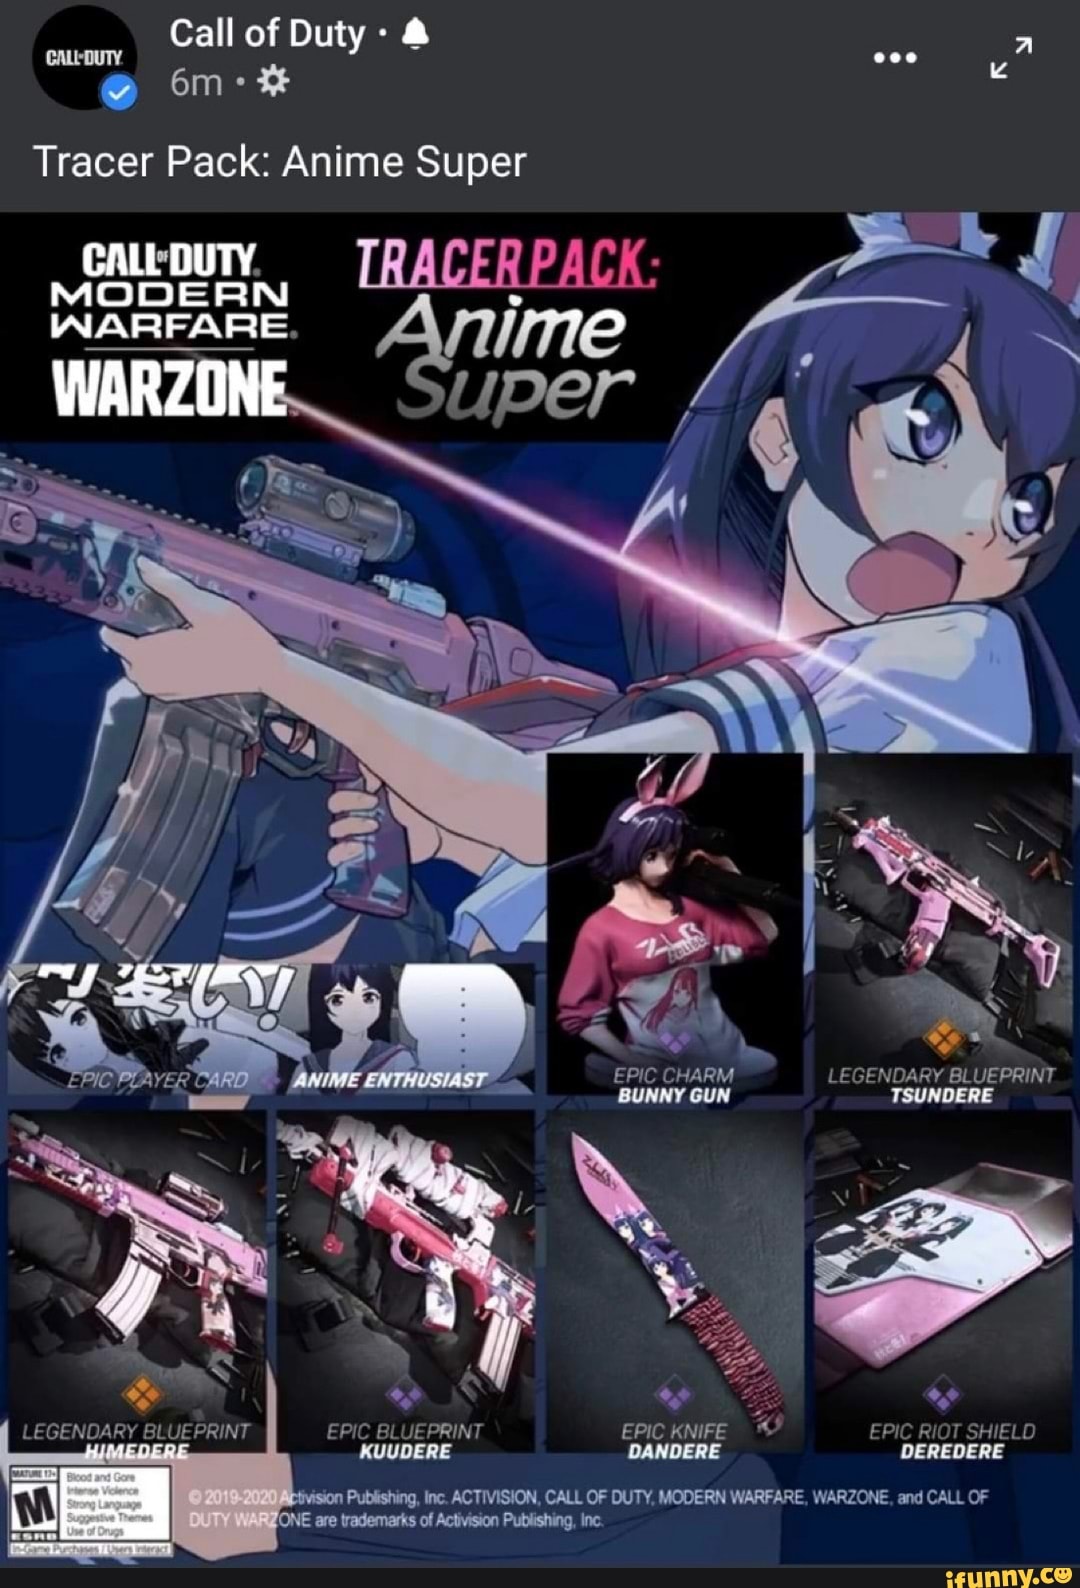 Call Of Duty A Om Tracer Pack Anime Super Call Duty Modern Tracer Pack Modern Warzone Warfare Nime Bunny Epic Charm Legendary Blueprint Tsundere Ii Legendary Blueprint Epic Blueprint Epic Knife Epic